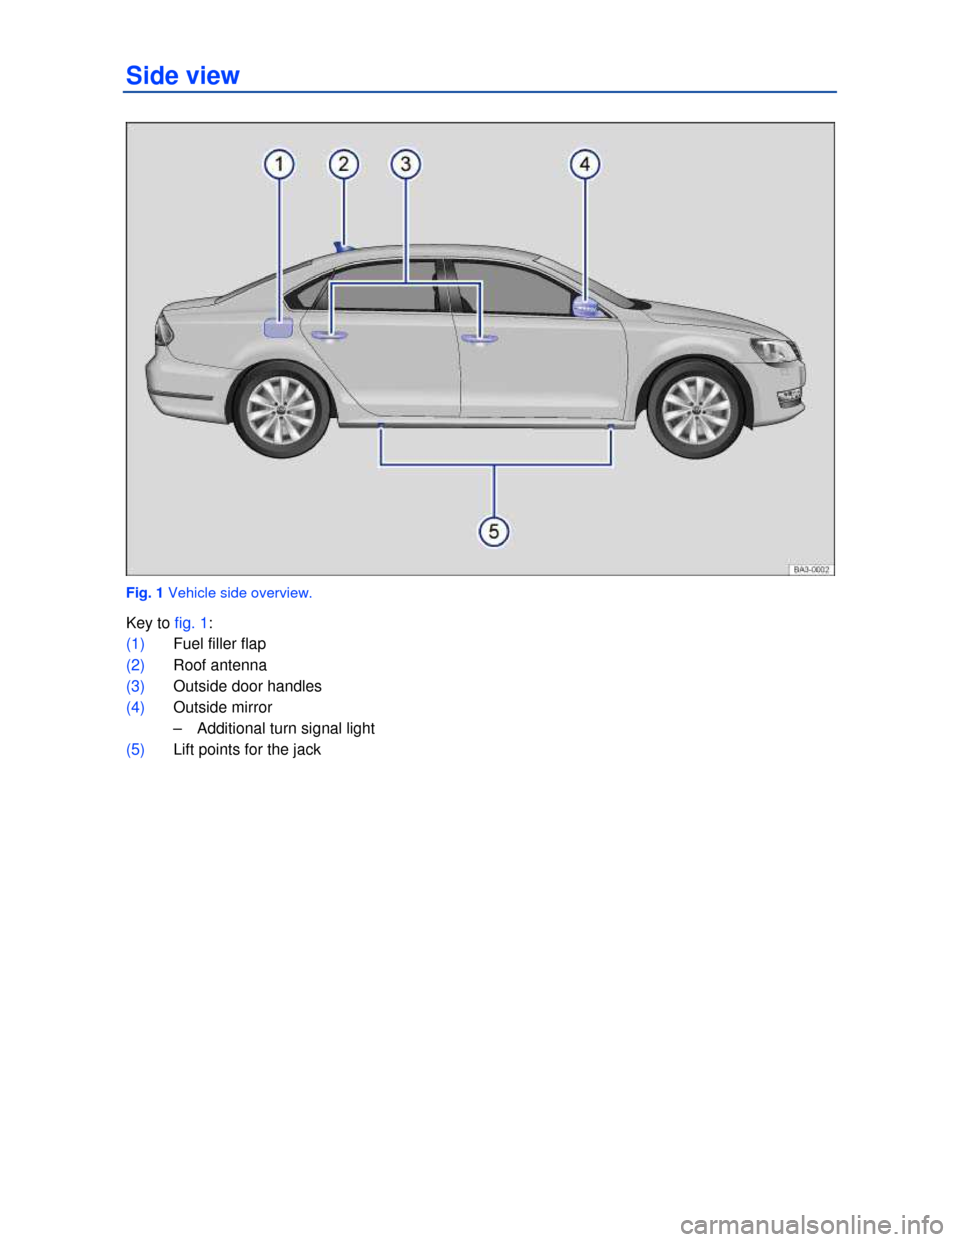 VOLKSWAGEN PASSAT 2013 B8 / 6.G Owners Manual  
Side view 
 
Fig. 1 Vehicle side overview. 
Key to fig. 1: 
(1) Fuel filler flap  
(2) Roof antenna  
(3) Outside door handles  
(4) Outside mirror  
–  Additional turn signal light  
(5) Lift poi